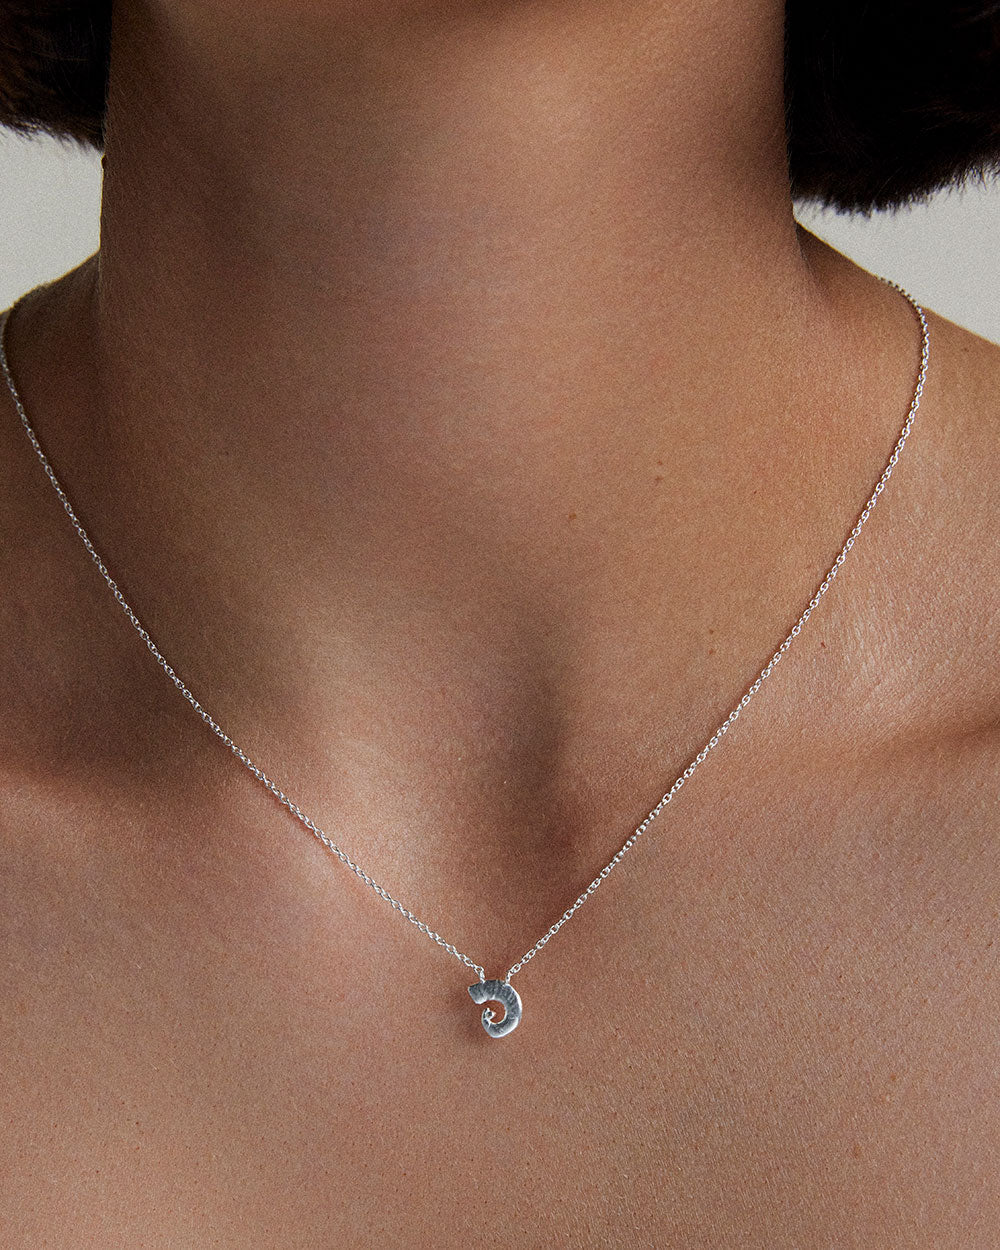 ARIES STAR SIGN NECKLACE (STERLING SILVER)